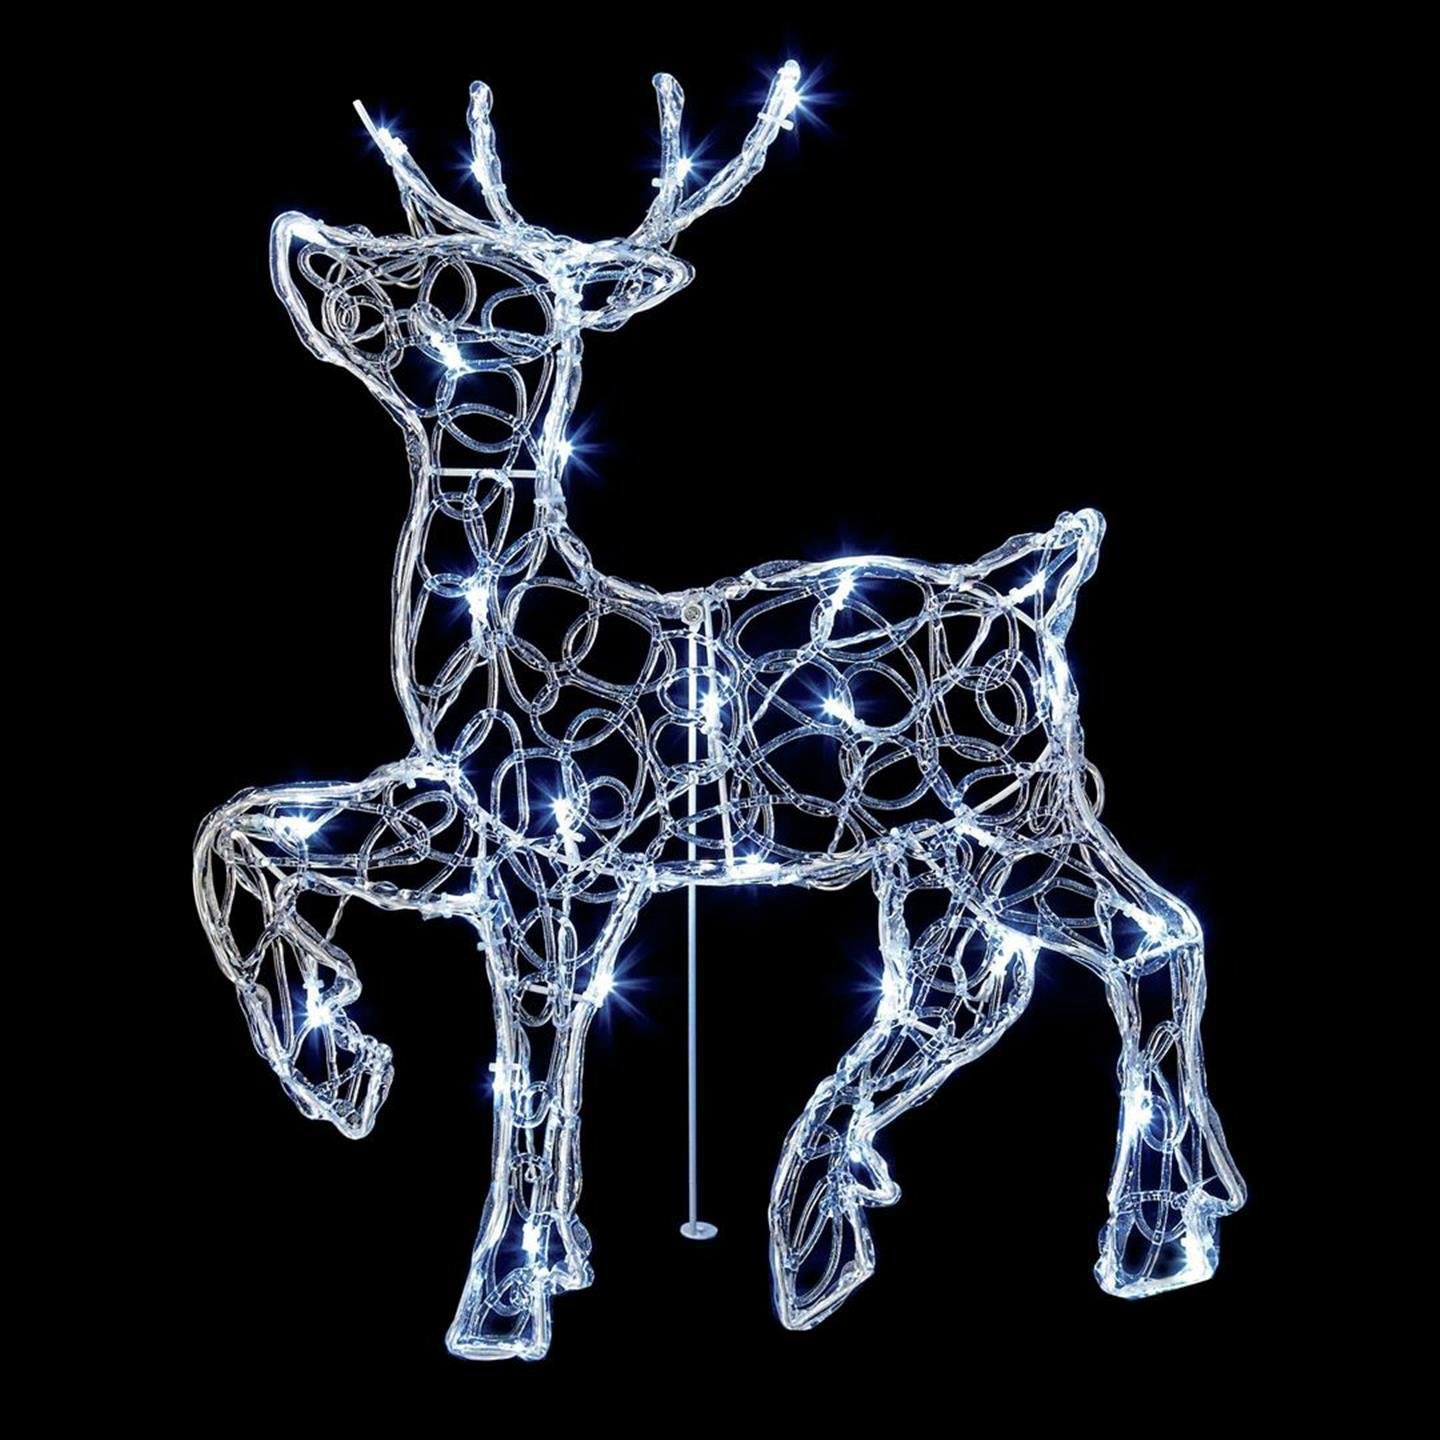 Premier Decorations Acrylic Standing LED Reindeer - White.